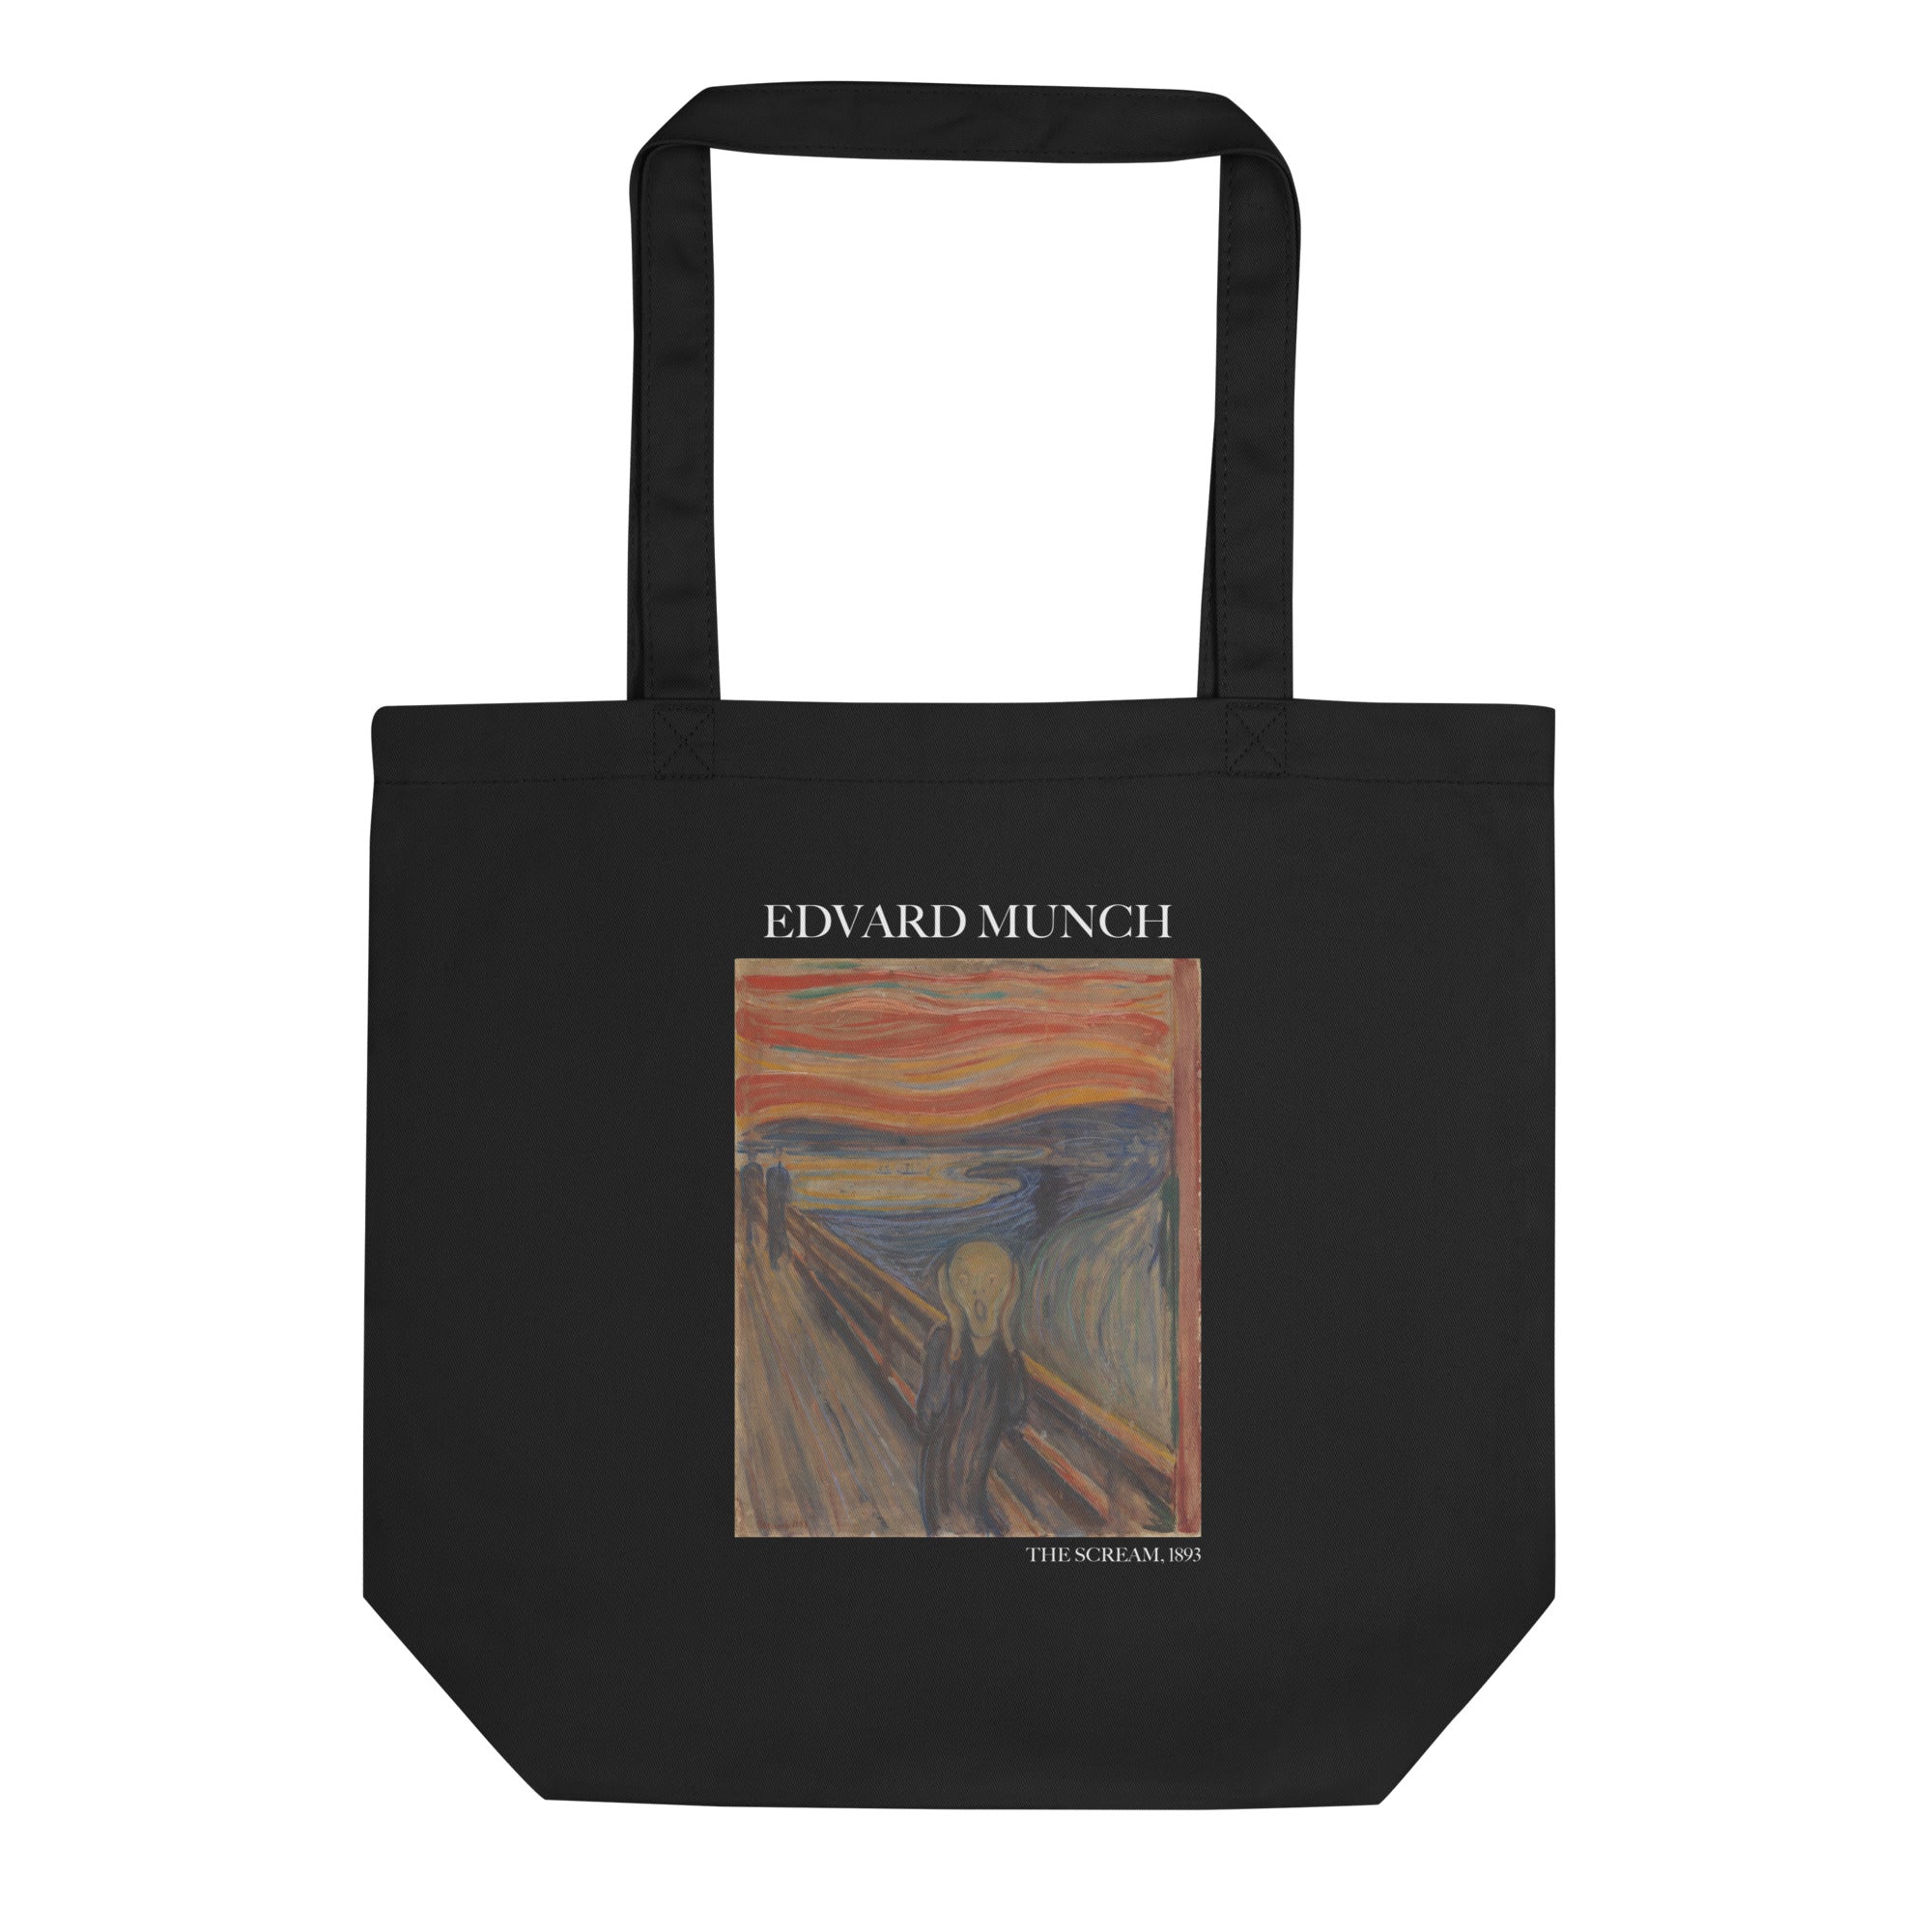 Edvard Munch 'The Scream' Famous Painting Totebag | Eco Friendly Art Tote Bag